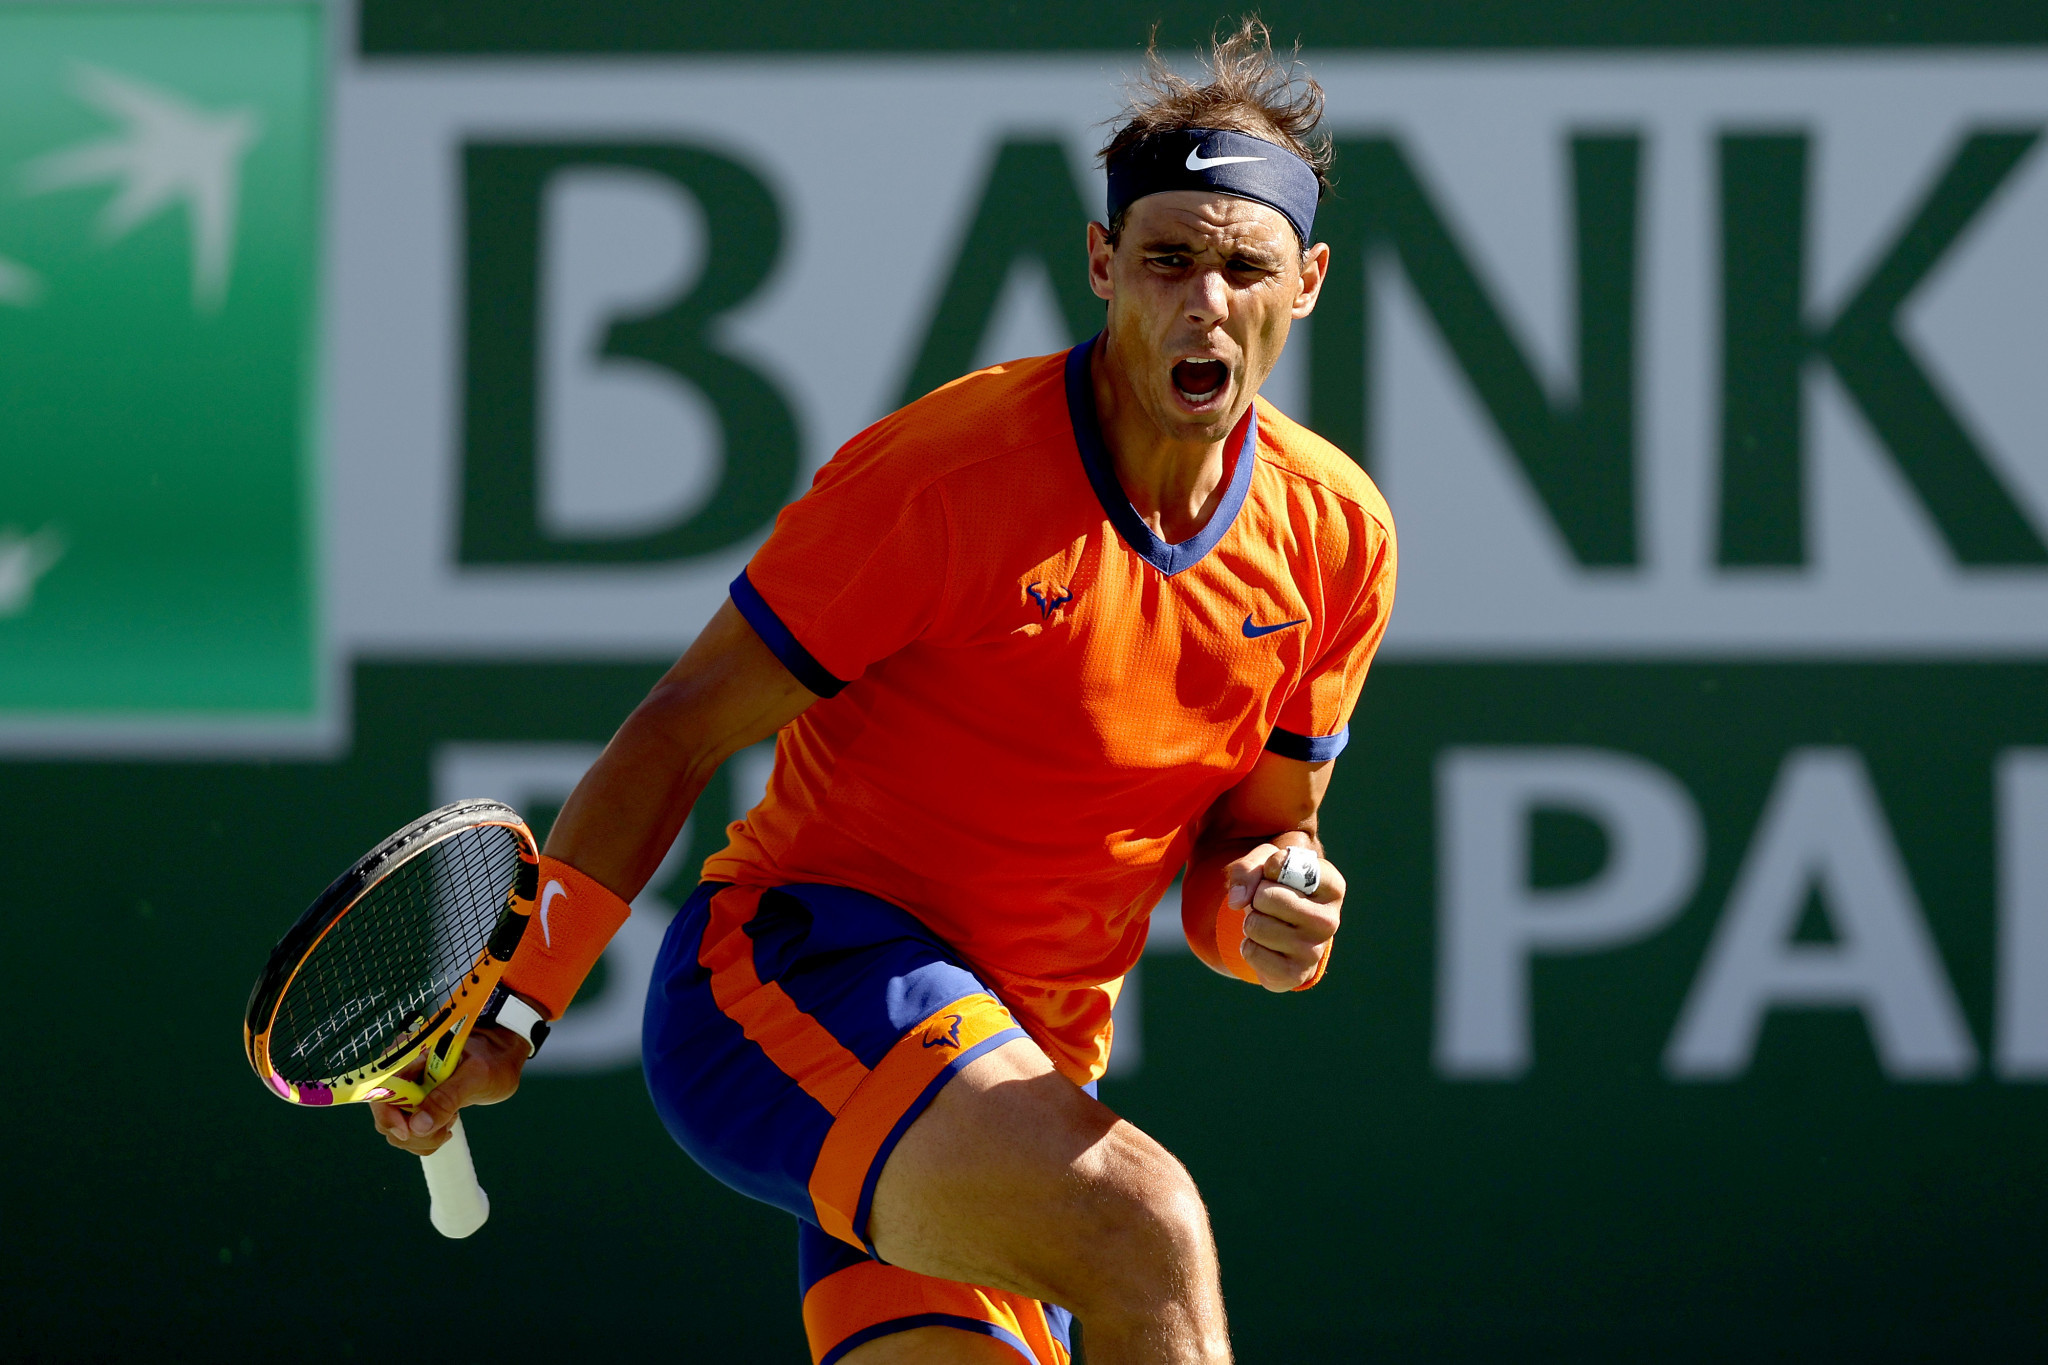 Nadal overcomes foot issues to extend winning run at Indian Wells